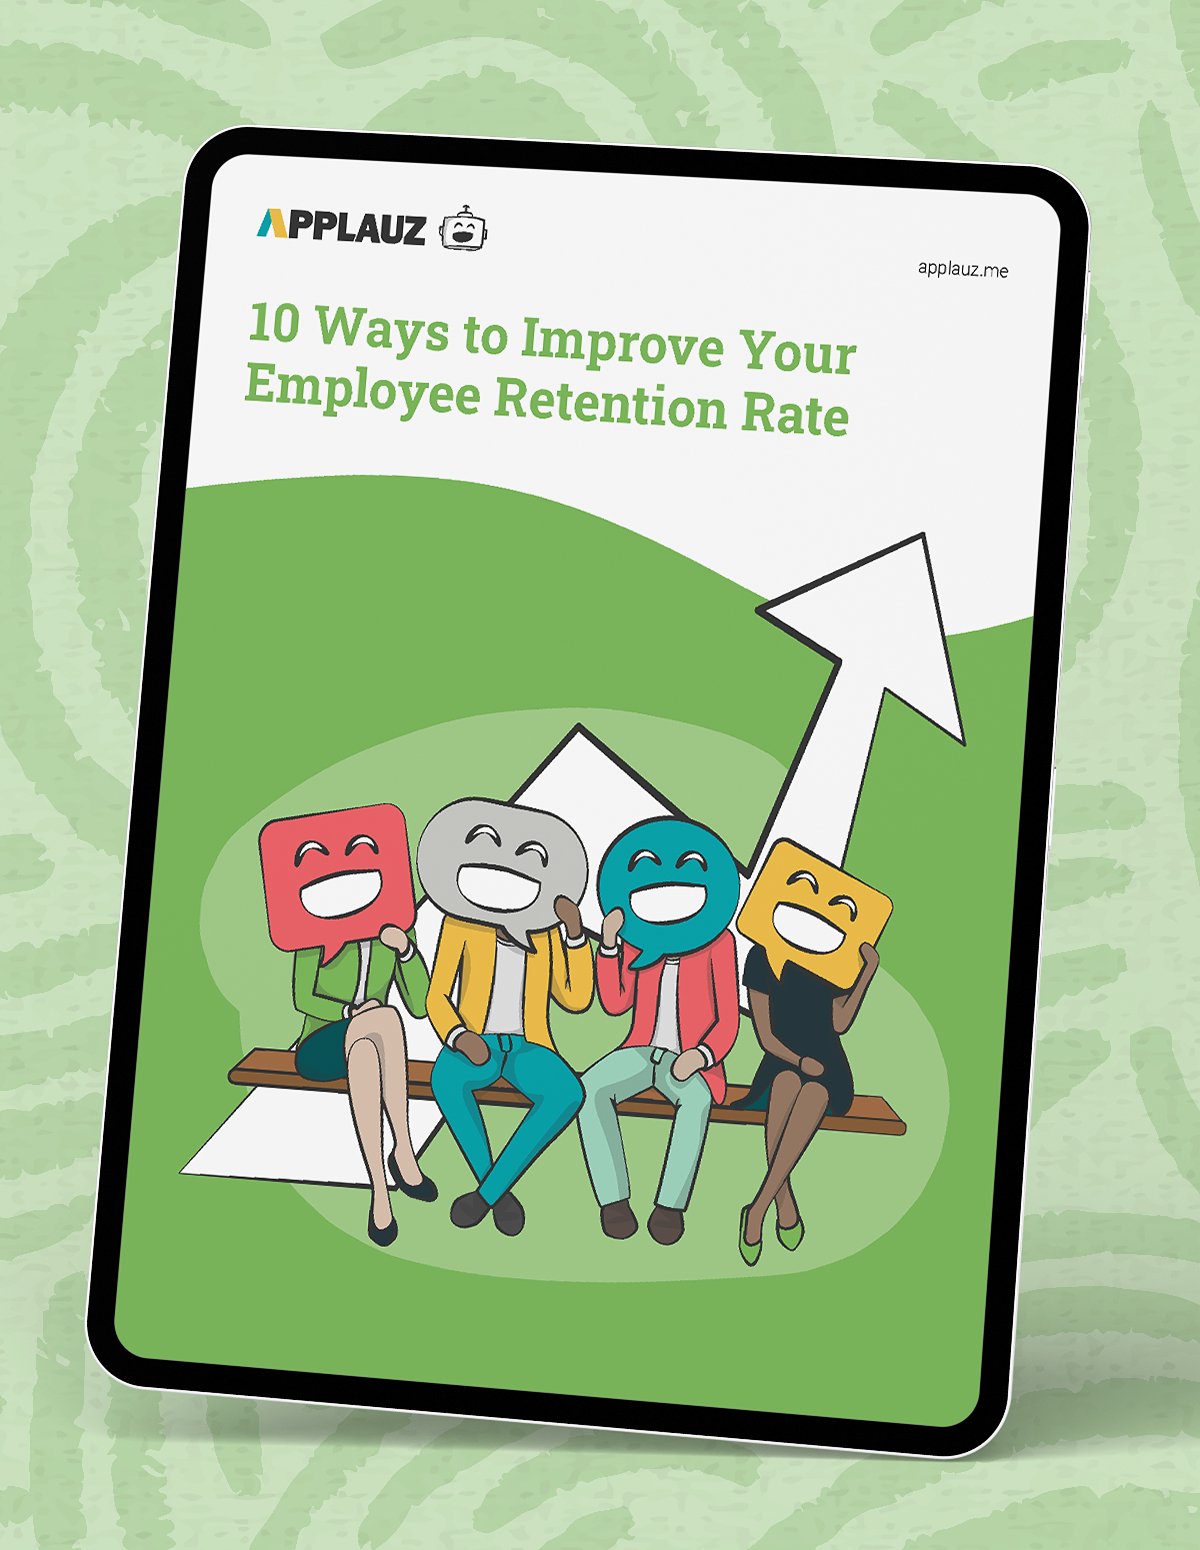 10 Ways to Improve Your Employee Retention Rate